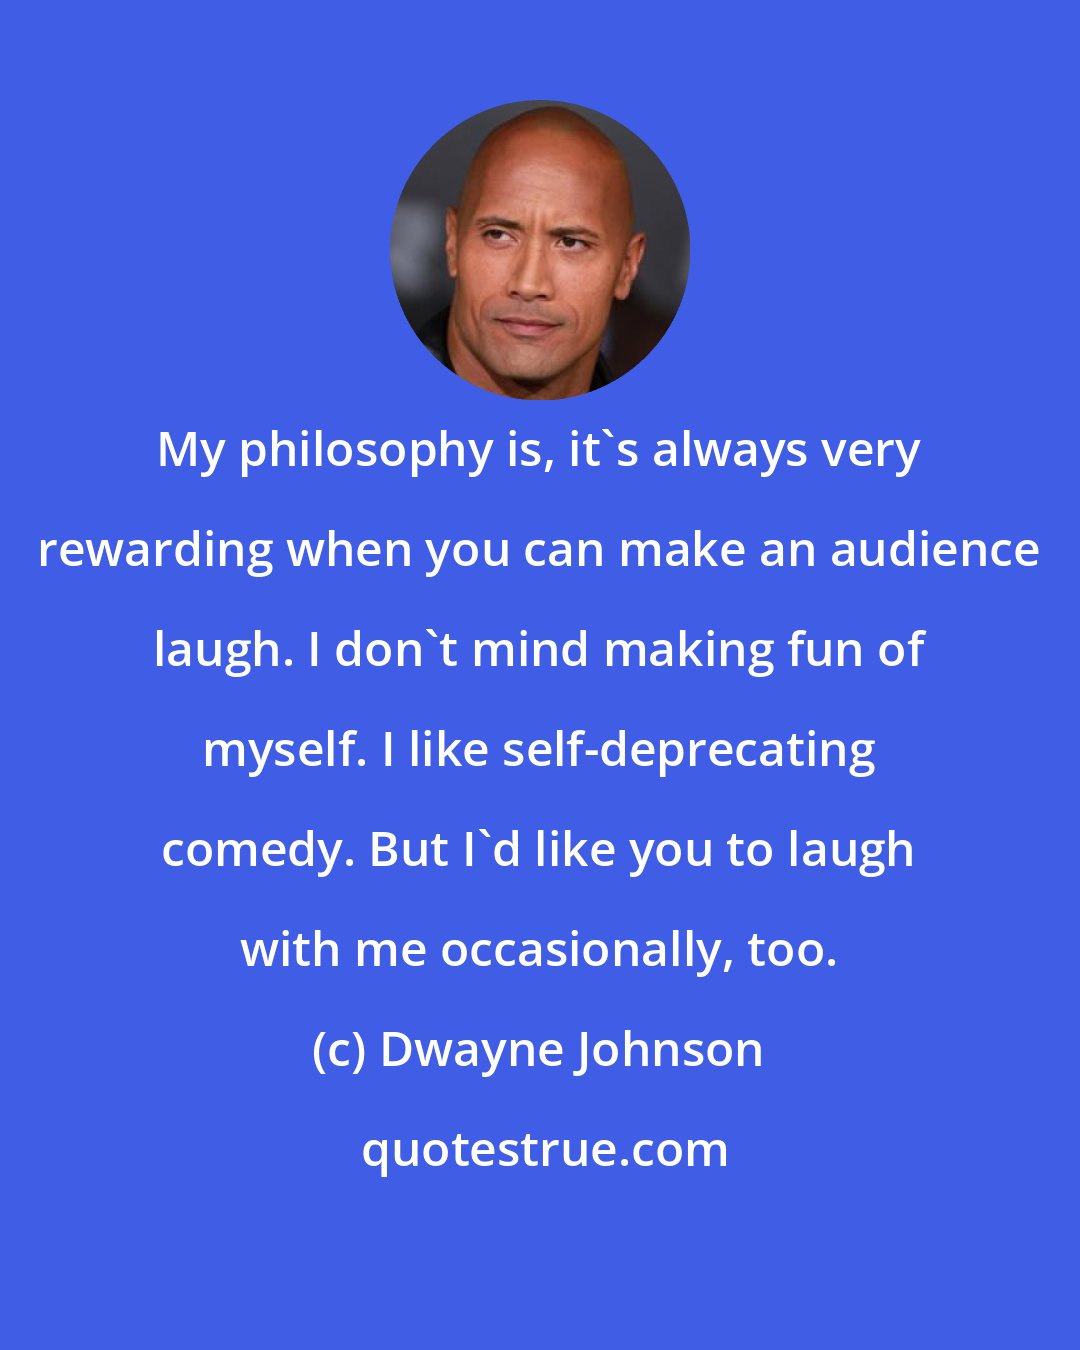 Dwayne Johnson: My philosophy is, it's always very rewarding when you can make an audience laugh. I don't mind making fun of myself. I like self-deprecating comedy. But I'd like you to laugh with me occasionally, too.